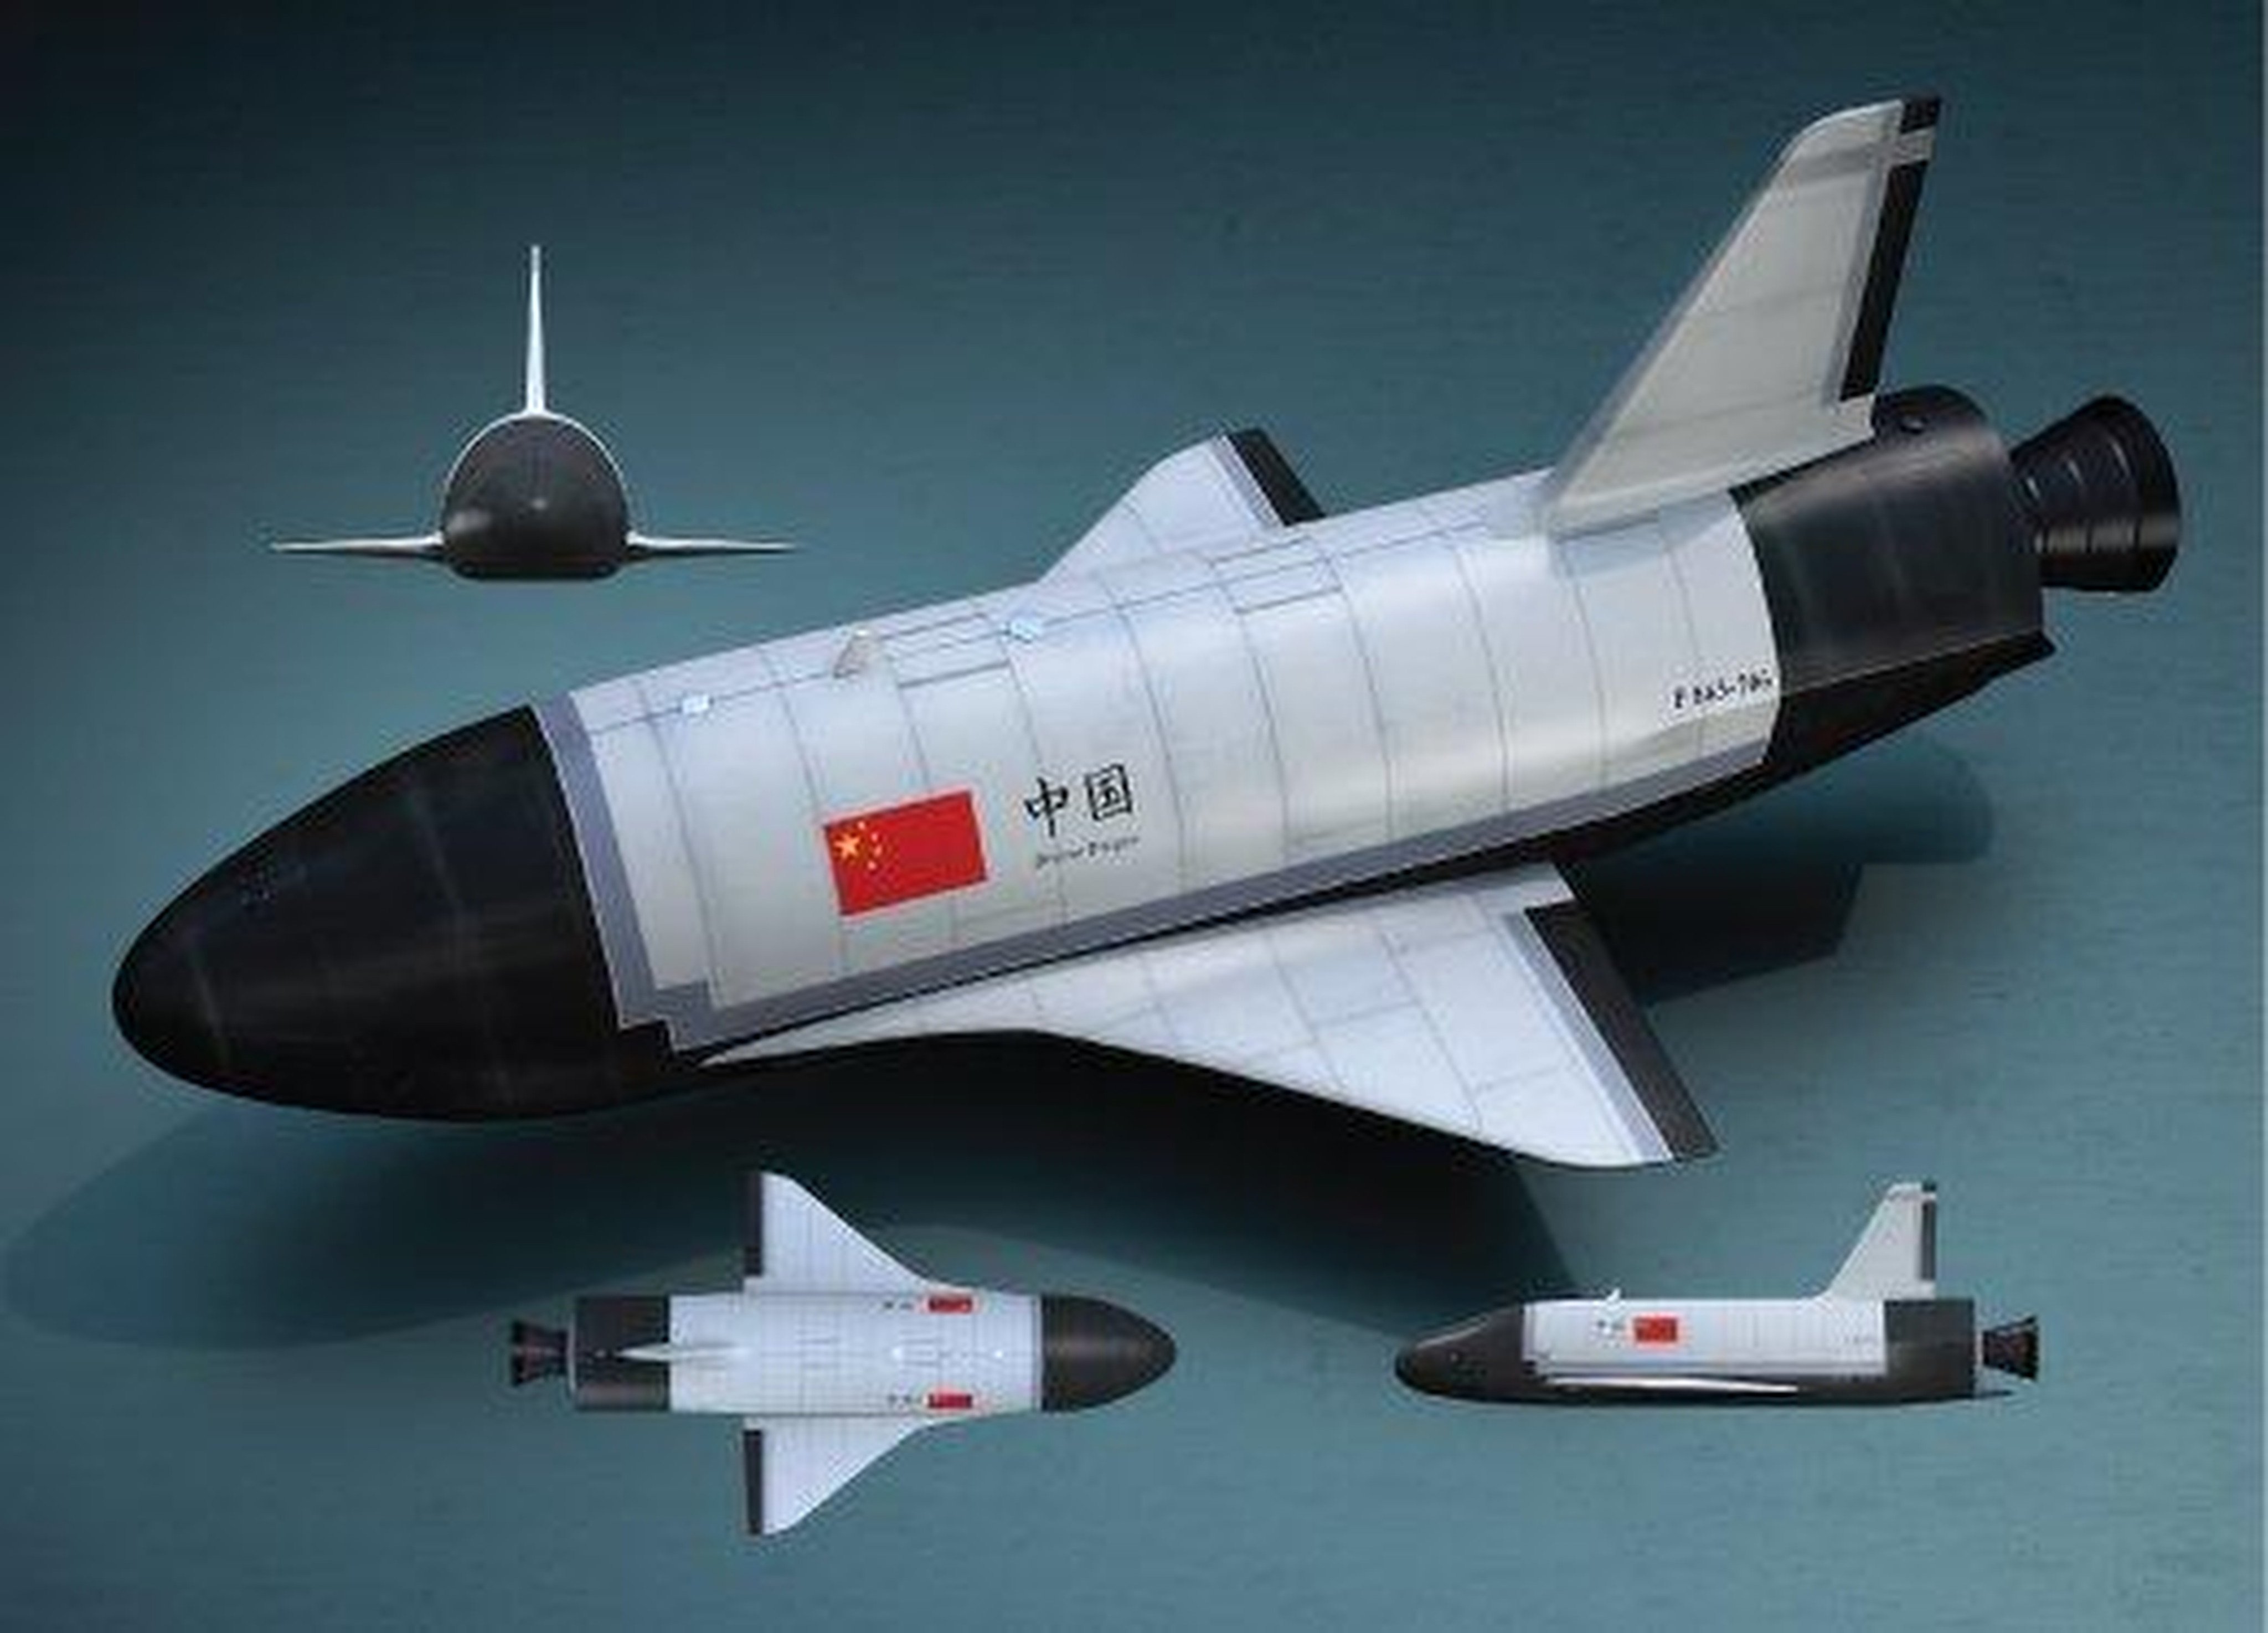 An illustration of China’s mysterious Shenlong space plane which is currently on its third mission in low-Earth orbit. Photo: Sina